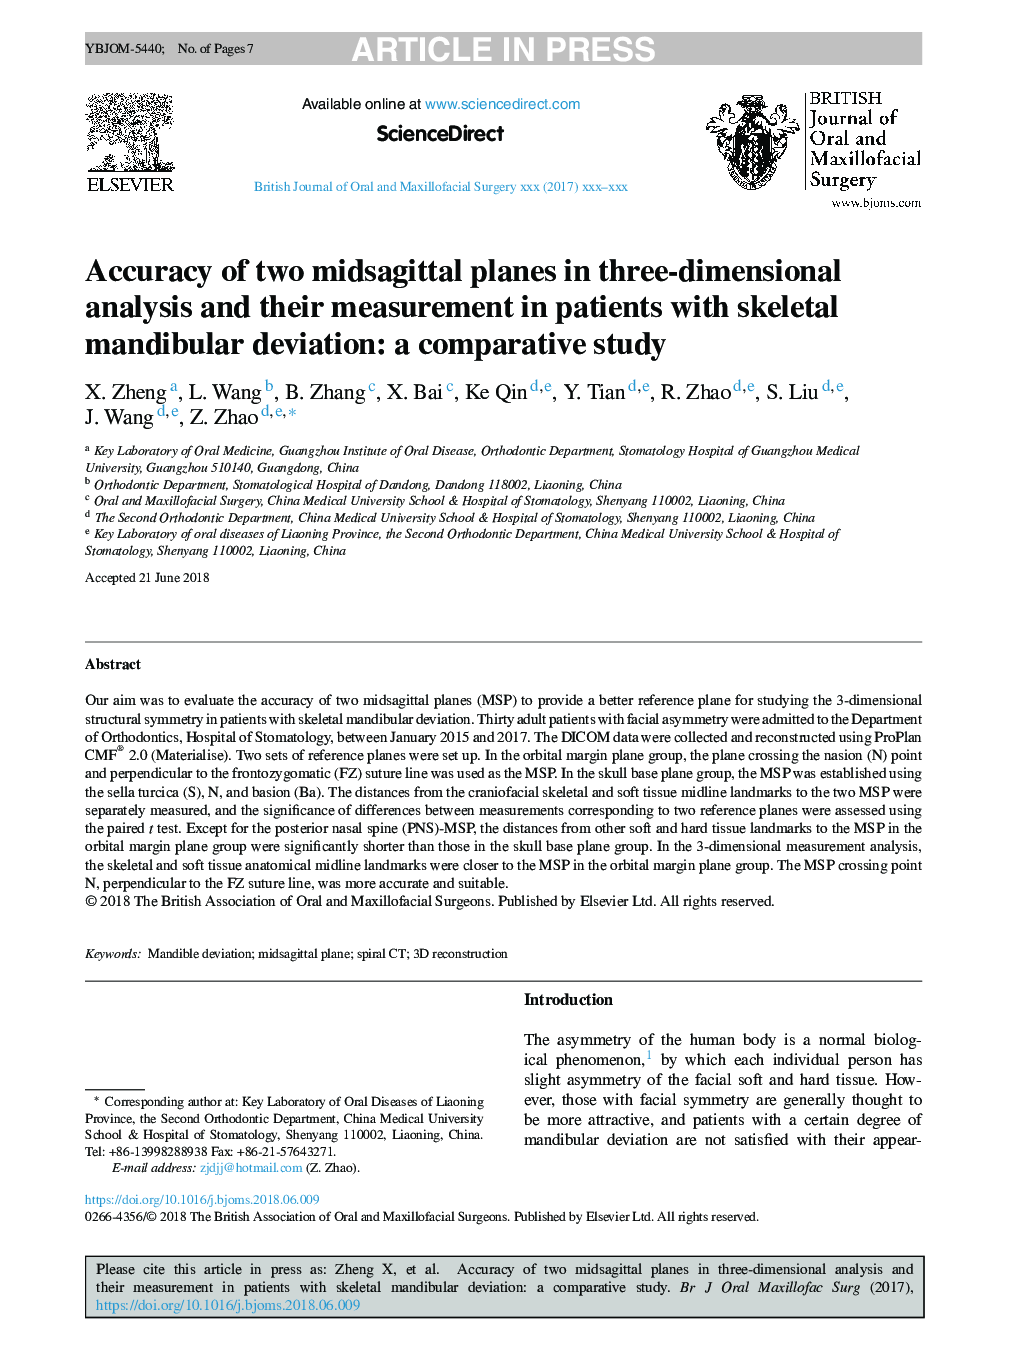 Accuracy of two midsagittal planes in three-dimensional analysis and their measurement in patients with skeletal mandibular deviation: a comparative study